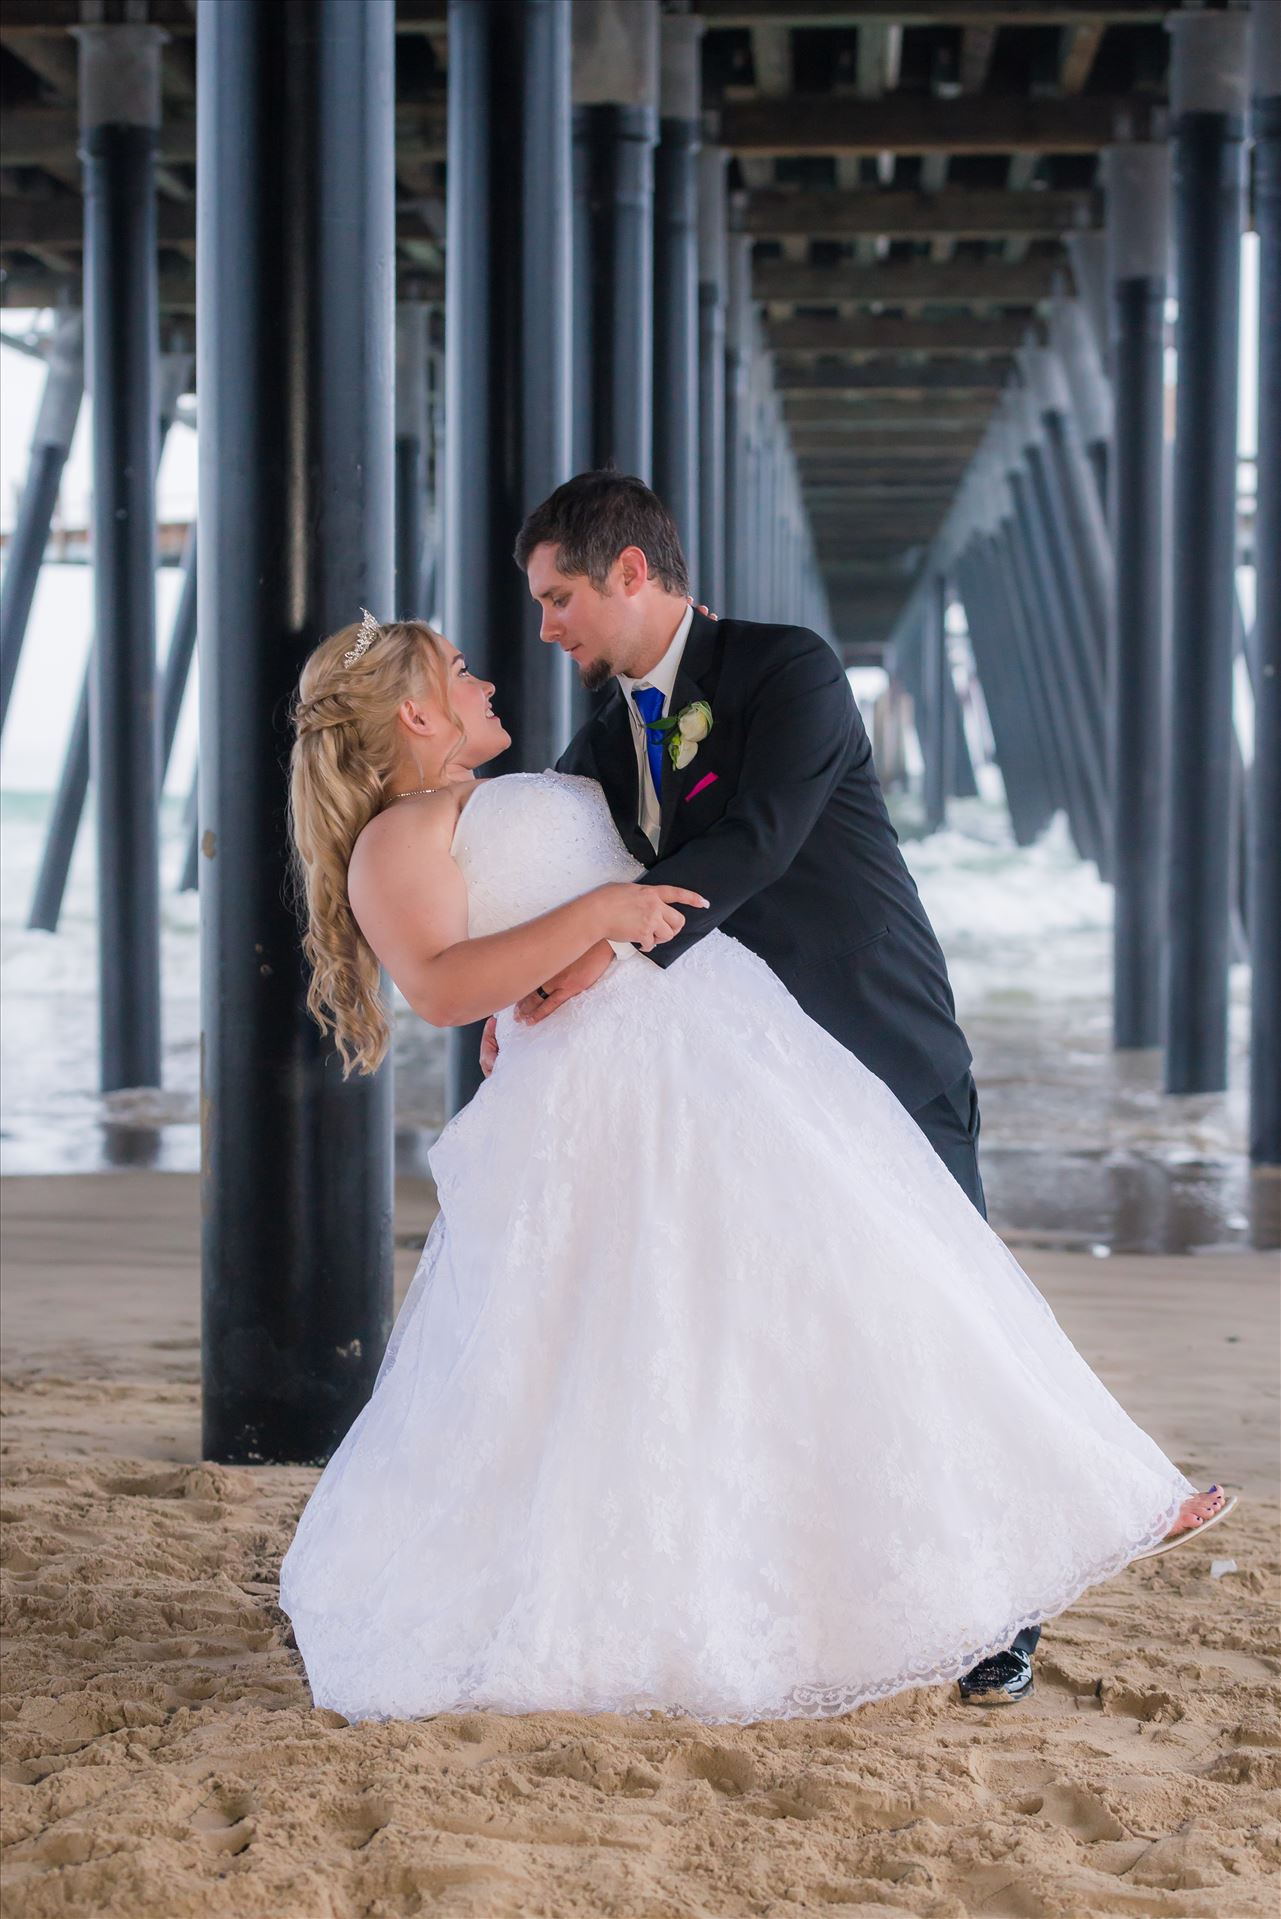 Jessica and Michael 69 Sea Venture Resort and Spa Wedding Photography by Mirror's Edge Photography in Pismo Beach, California. Bride and Groom under Pismo Beach Pier by Sarah Williams